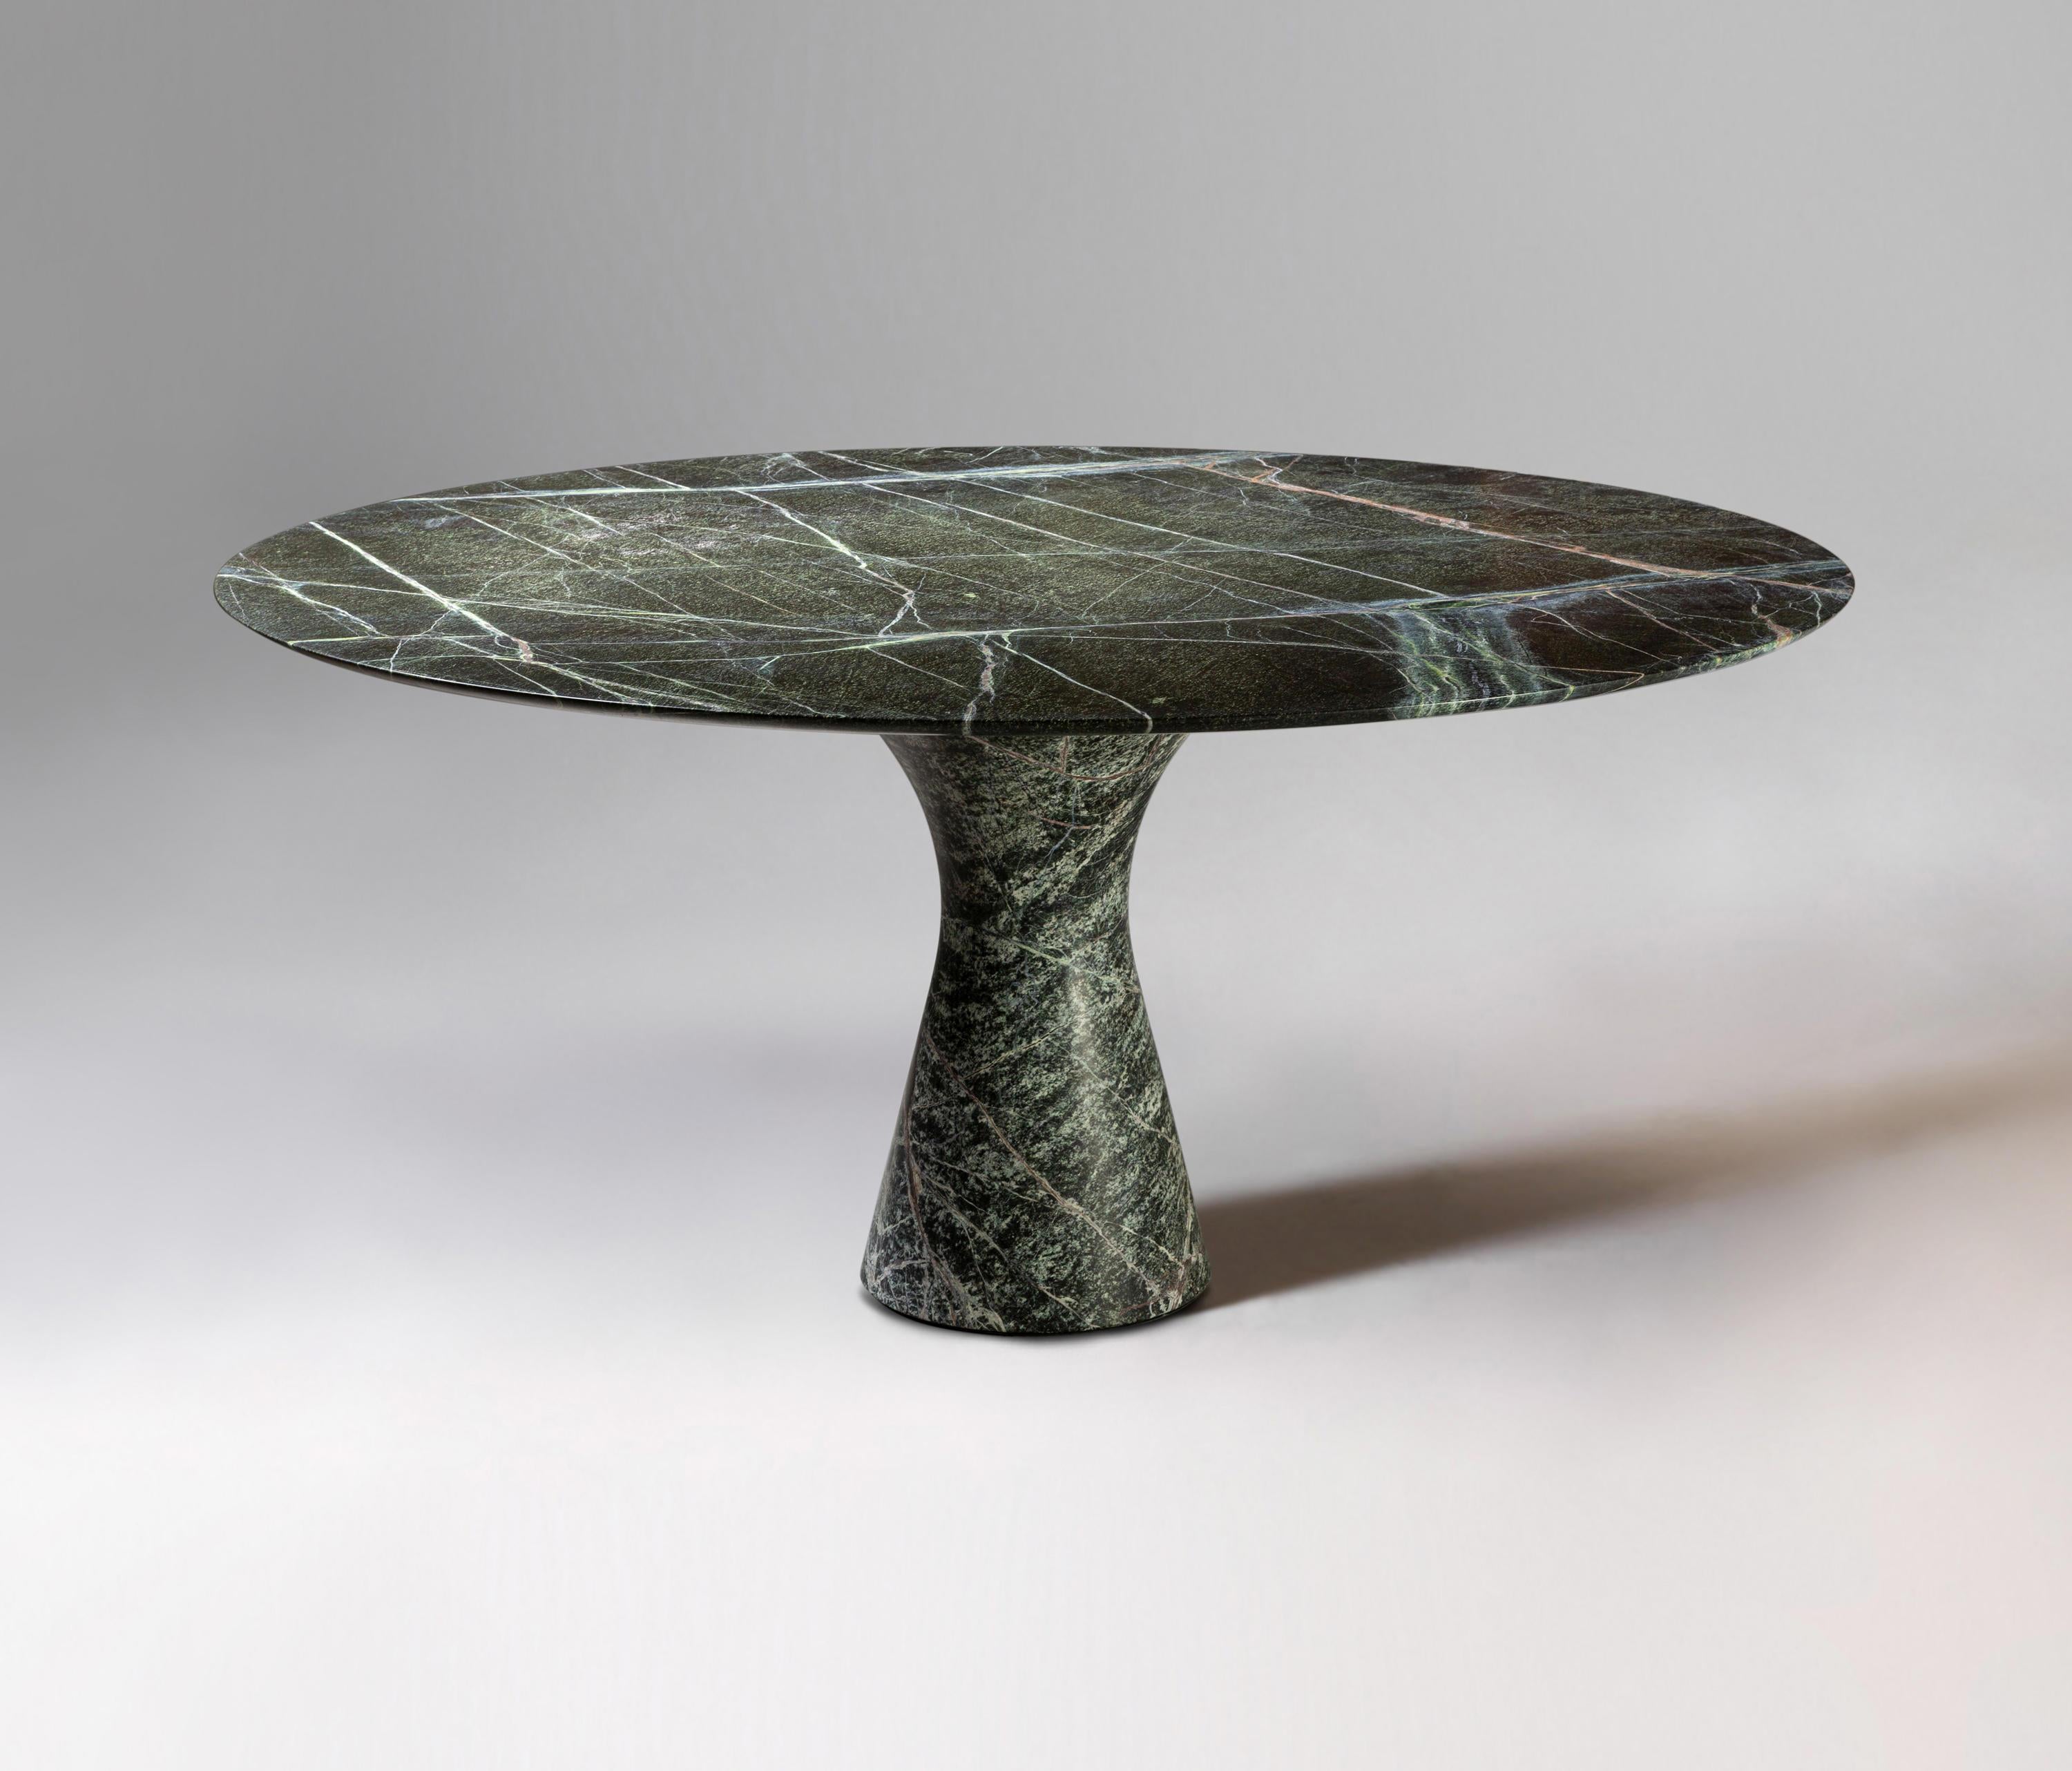 Picasso green Refined Contemporary Marble dining table 160/75
Dimensions: 160 x 75 cm
Materials: Picasso green

Angelo is the essence of a round table in natural stone, a sculptural shape in robust material with elegant lines and refined